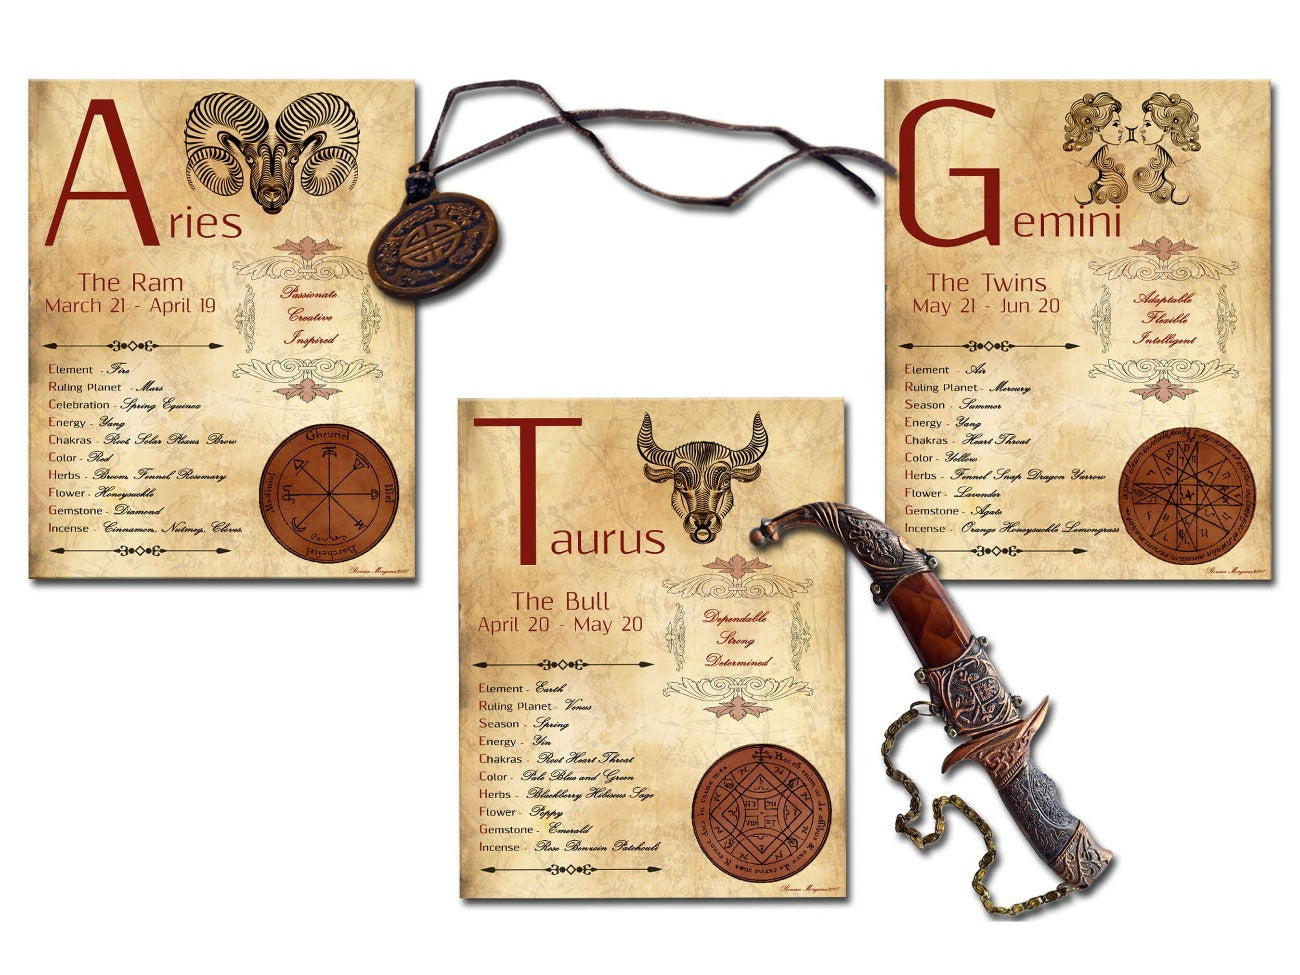 Aries, Gemini, and Taurus pages show the Red Titles and zodiac imagery for each page.